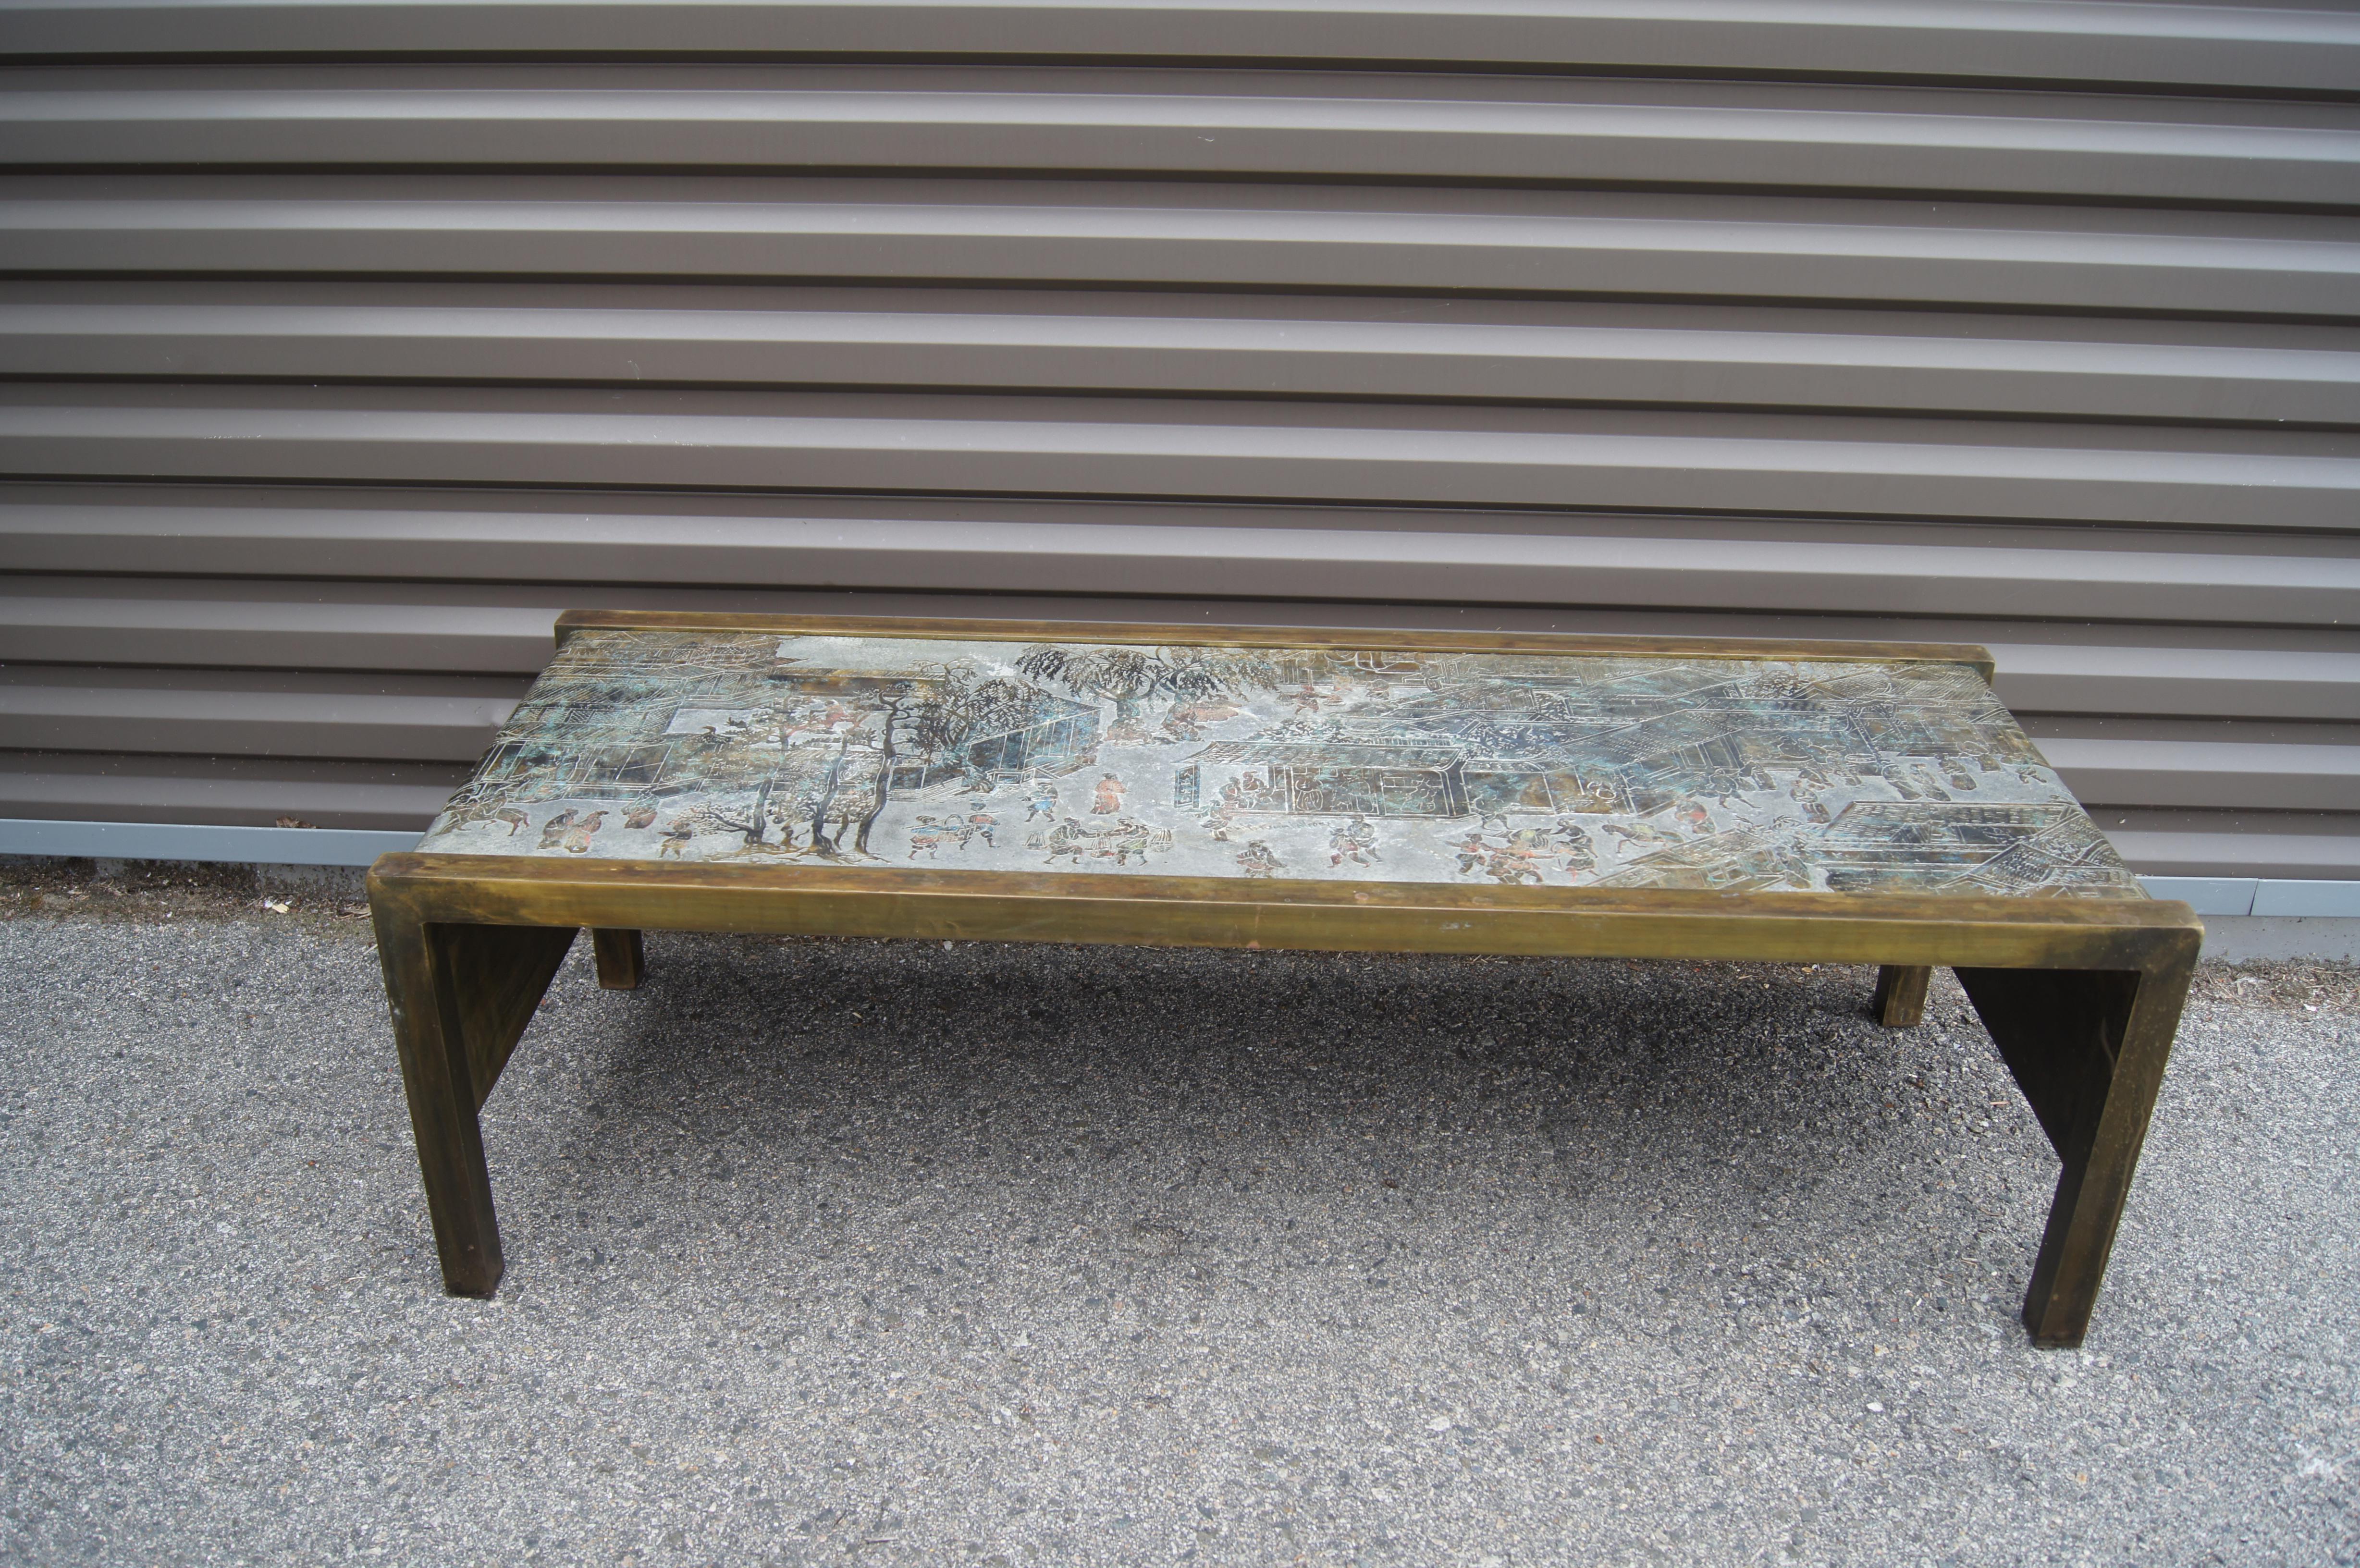 Philip and Kelvin LaVerne crafted the Chan coffee table by acid-etching bronze, pewter, and colored enamel. Depicting village activity, this hard-to-find iteration of the patinated table features a waterfall edge with the colorful scene flowing